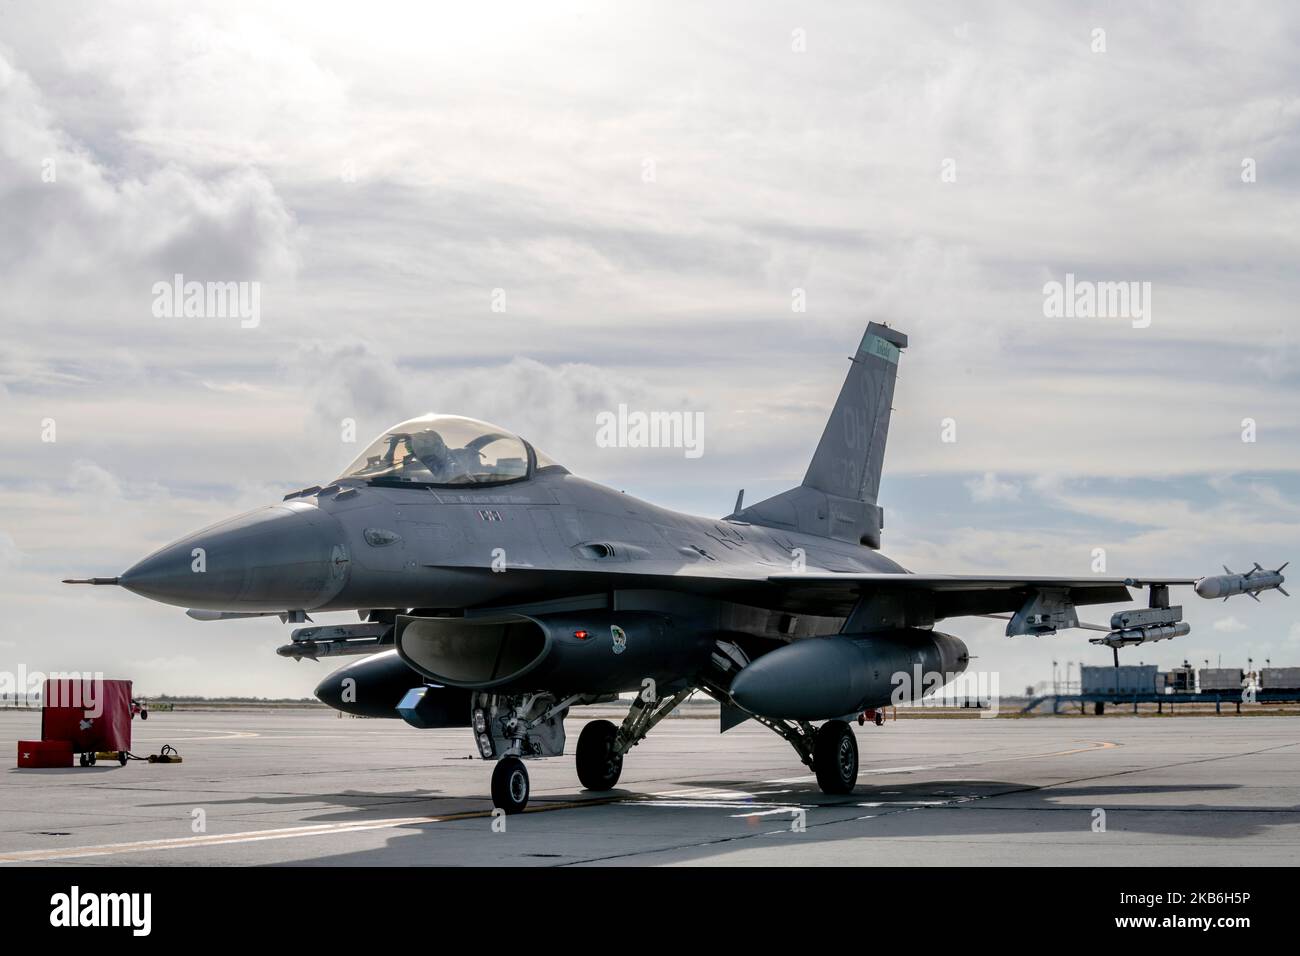 U.S. Air Force Maj. Joshua Caudill, an F-16 fighter pilot assigned to the Ohio National Guard's 180th Fighter Wing, starts a U.S. Air Force F-16 fighting falcon, assigned to the 180FW, before a training flight at Naval Air Station Key West, Nov. 2, 2022. The 180FW deployed to Key West to train with VFC-111, the Navy's premier adversary squadron, providing realistic training scenarios that ensure the 180FW is prepared for homeland defense and contingency operations around the globe.  (U.S. Air National Guard photo by Staff Sgt. Kregg York)  *Some photographic elements have been blurred for secu Stock Photo